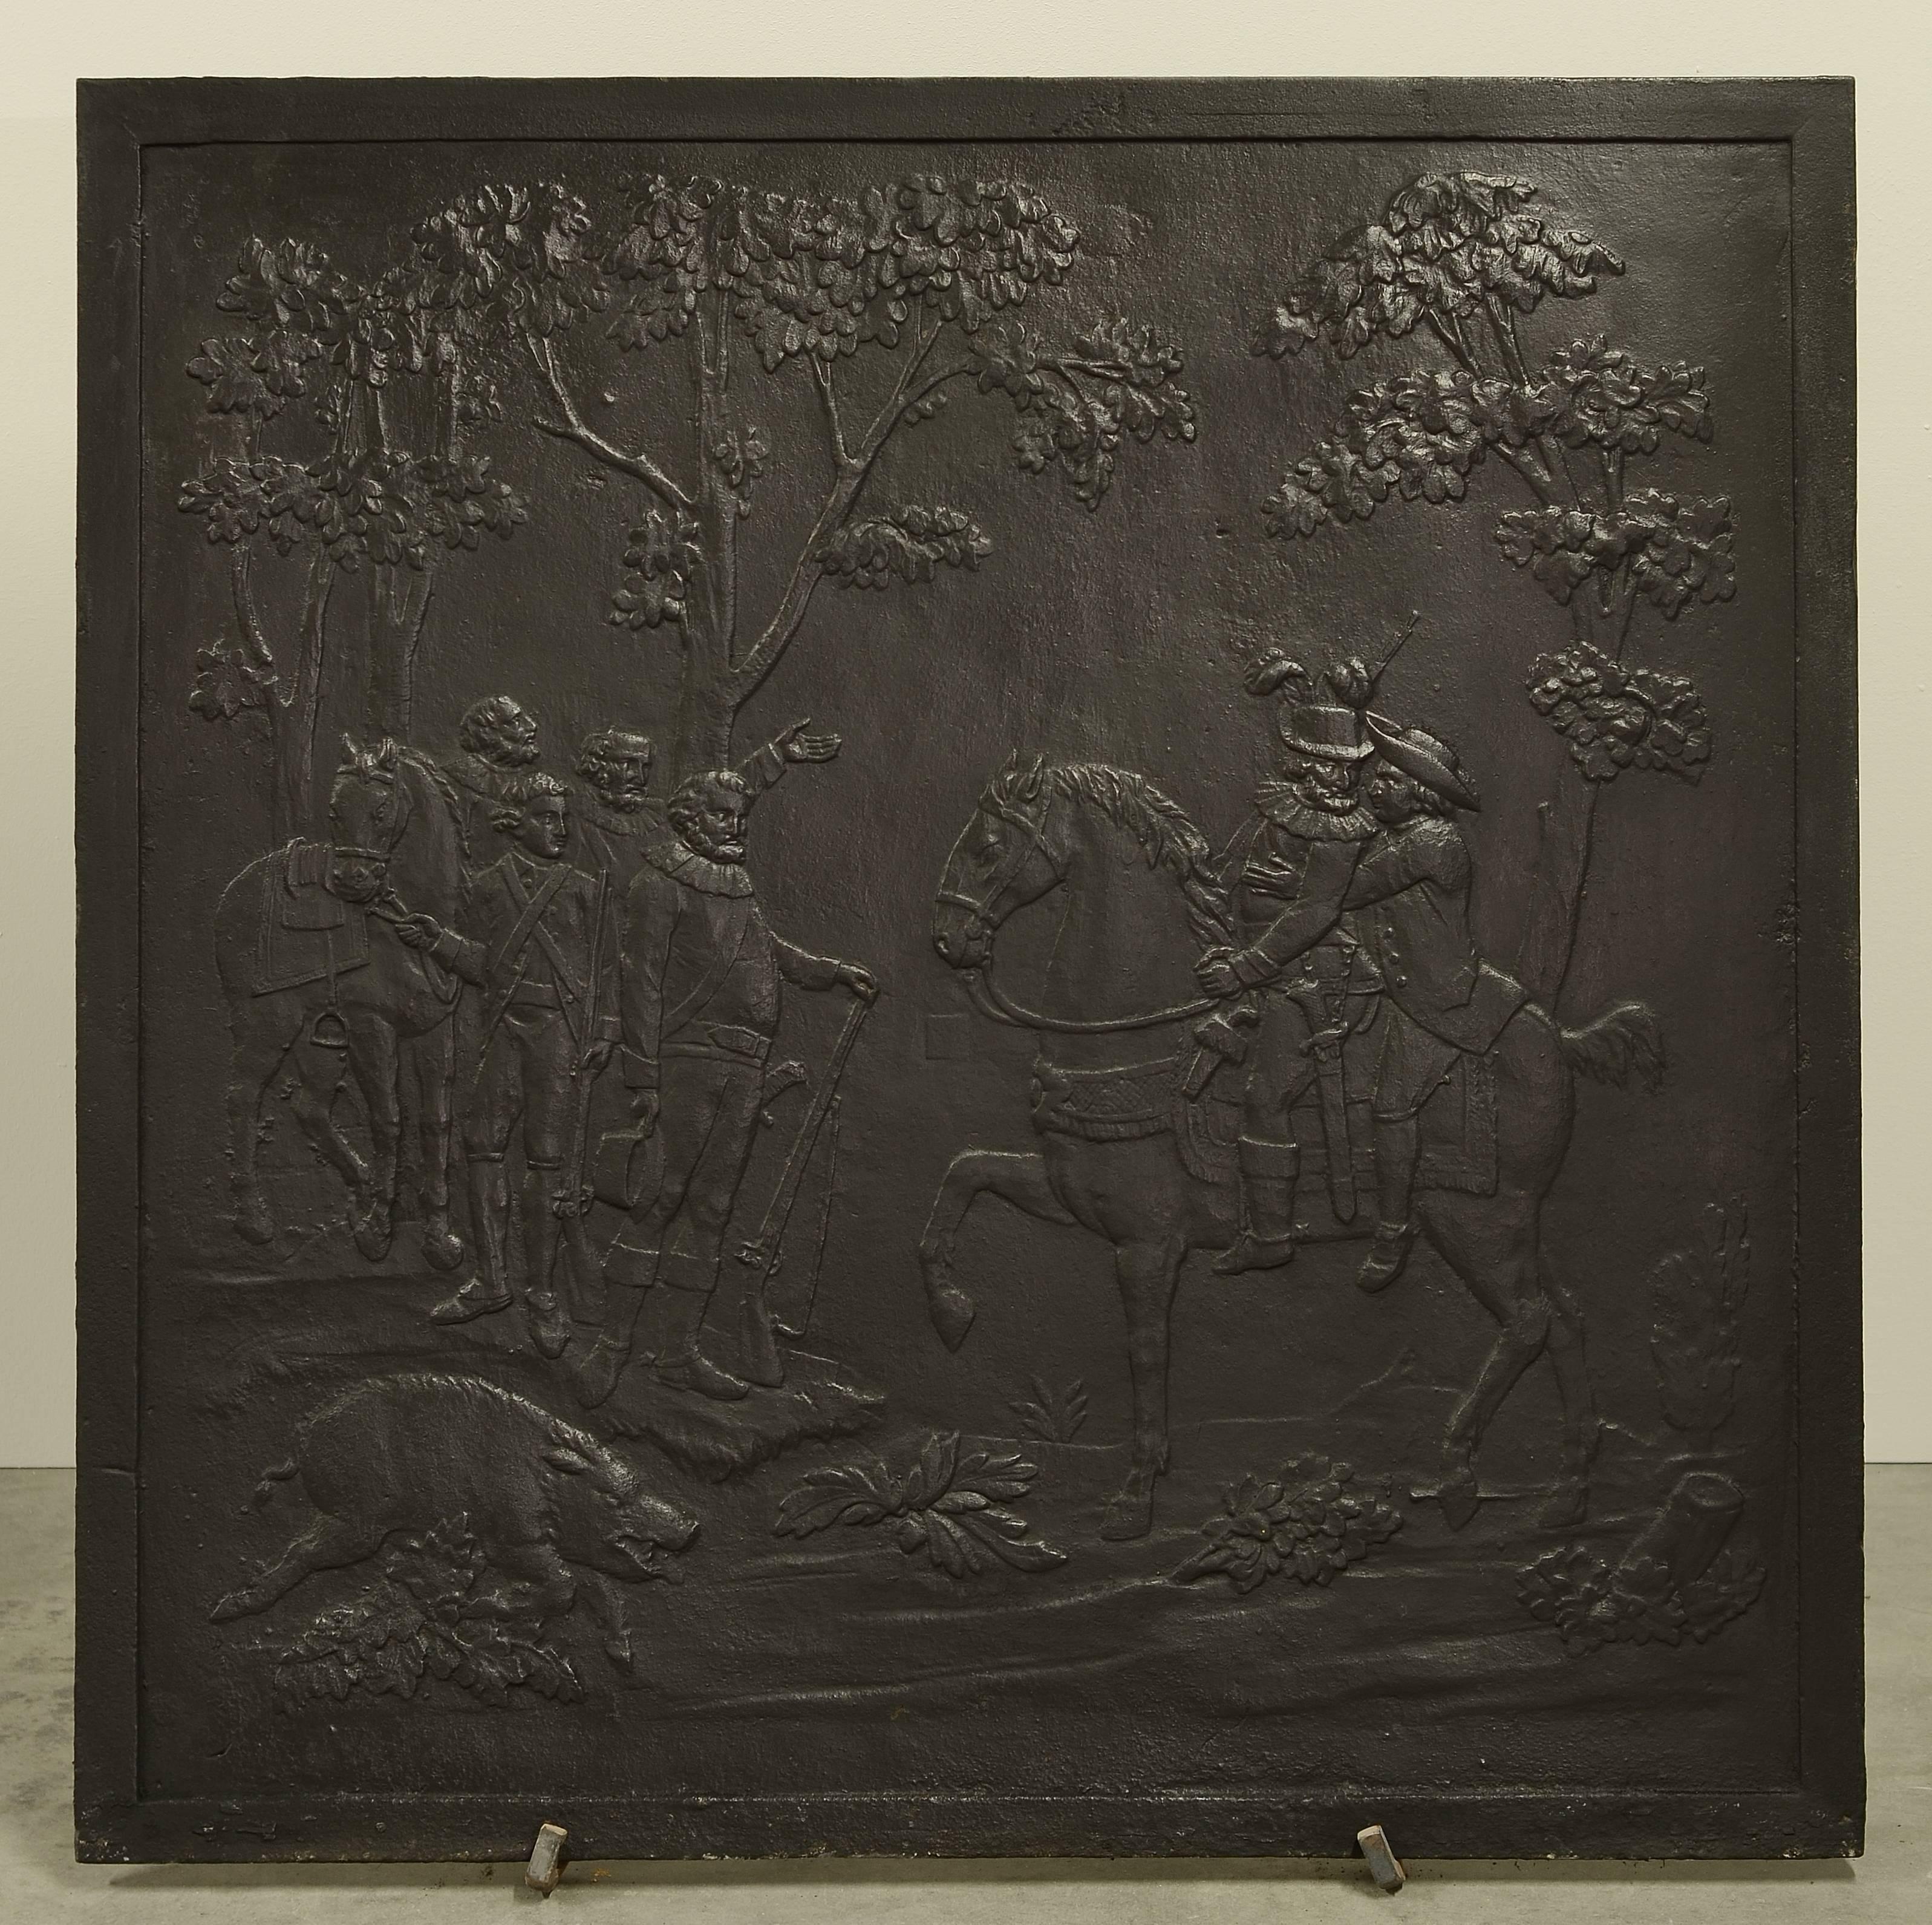 19th century cast iron fireback showing a hunting scene.

Perfect square and usable dimension.
Can be used in a fire or as backsplash.

Can be supplied with stand.